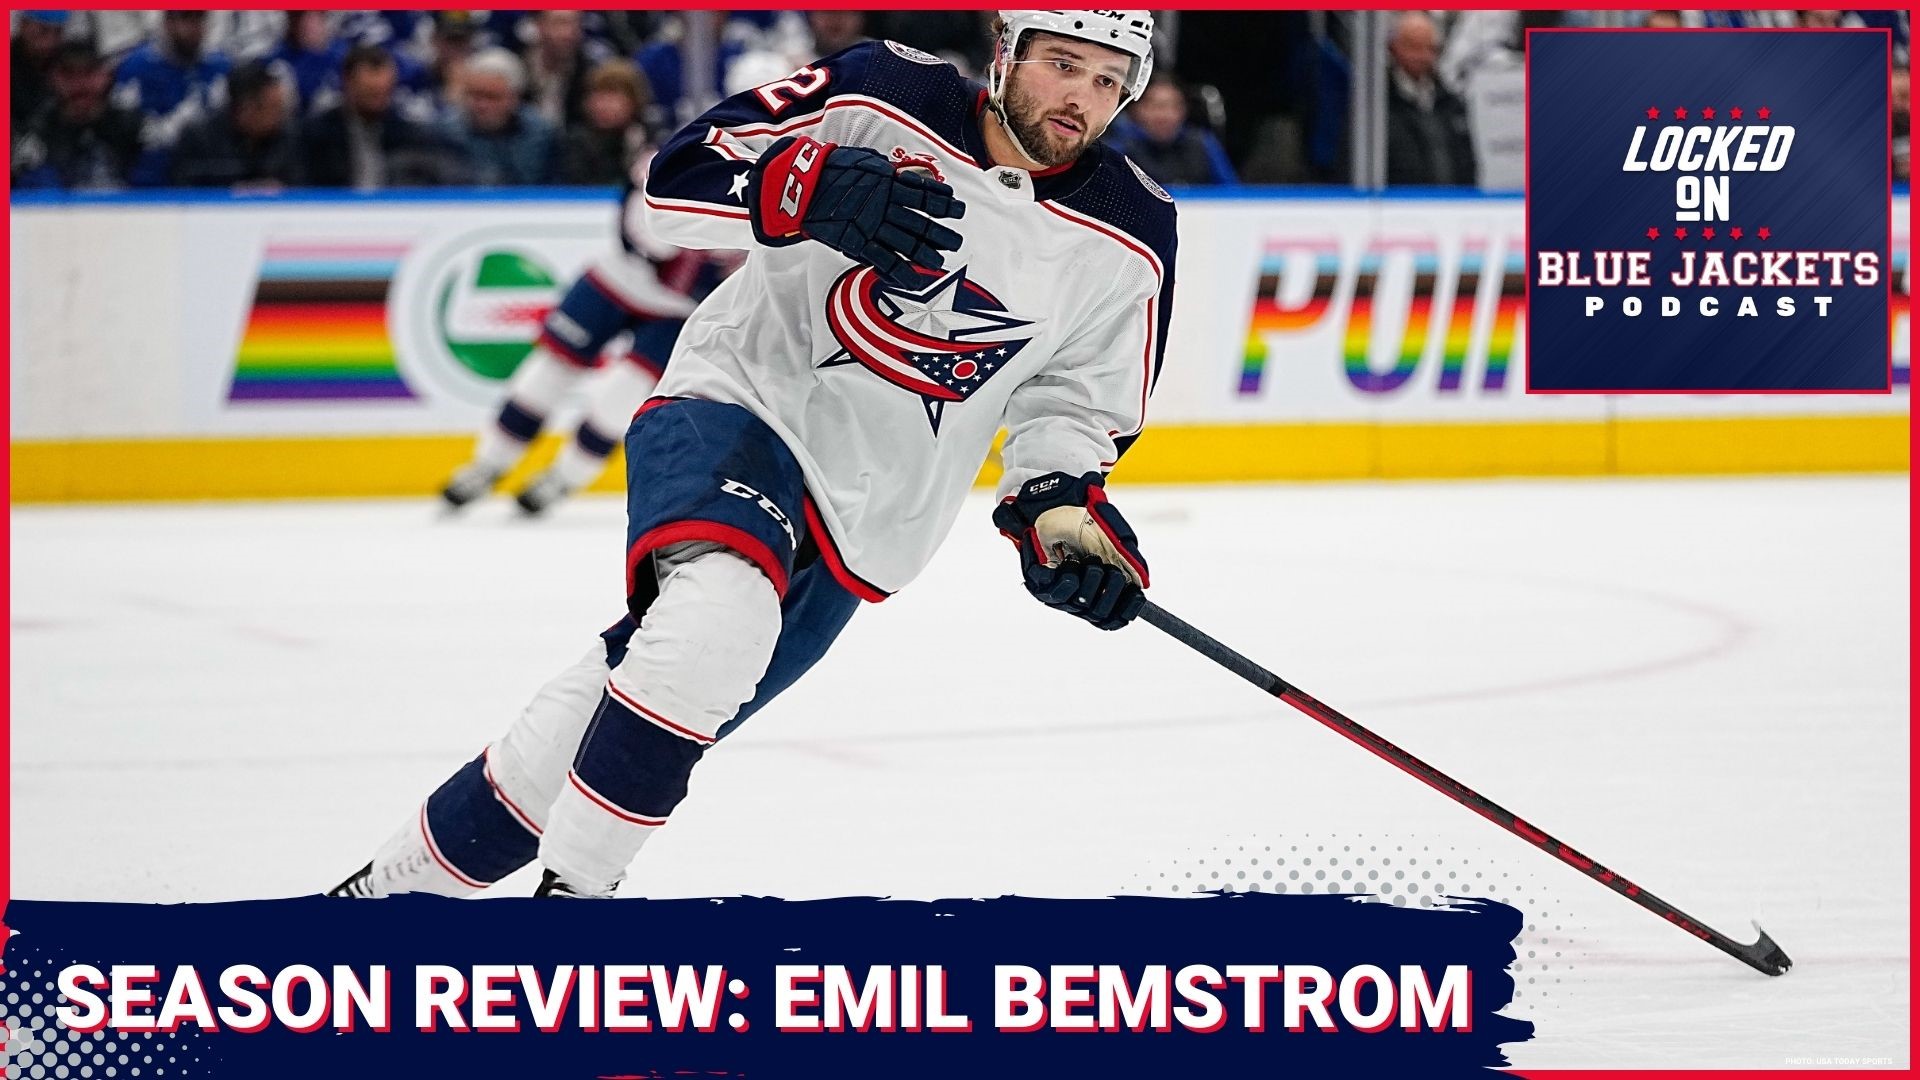 Emil Bemstrom has had an up and down career with the Blue Jackets so far. Can he be better than half a point per game next season?